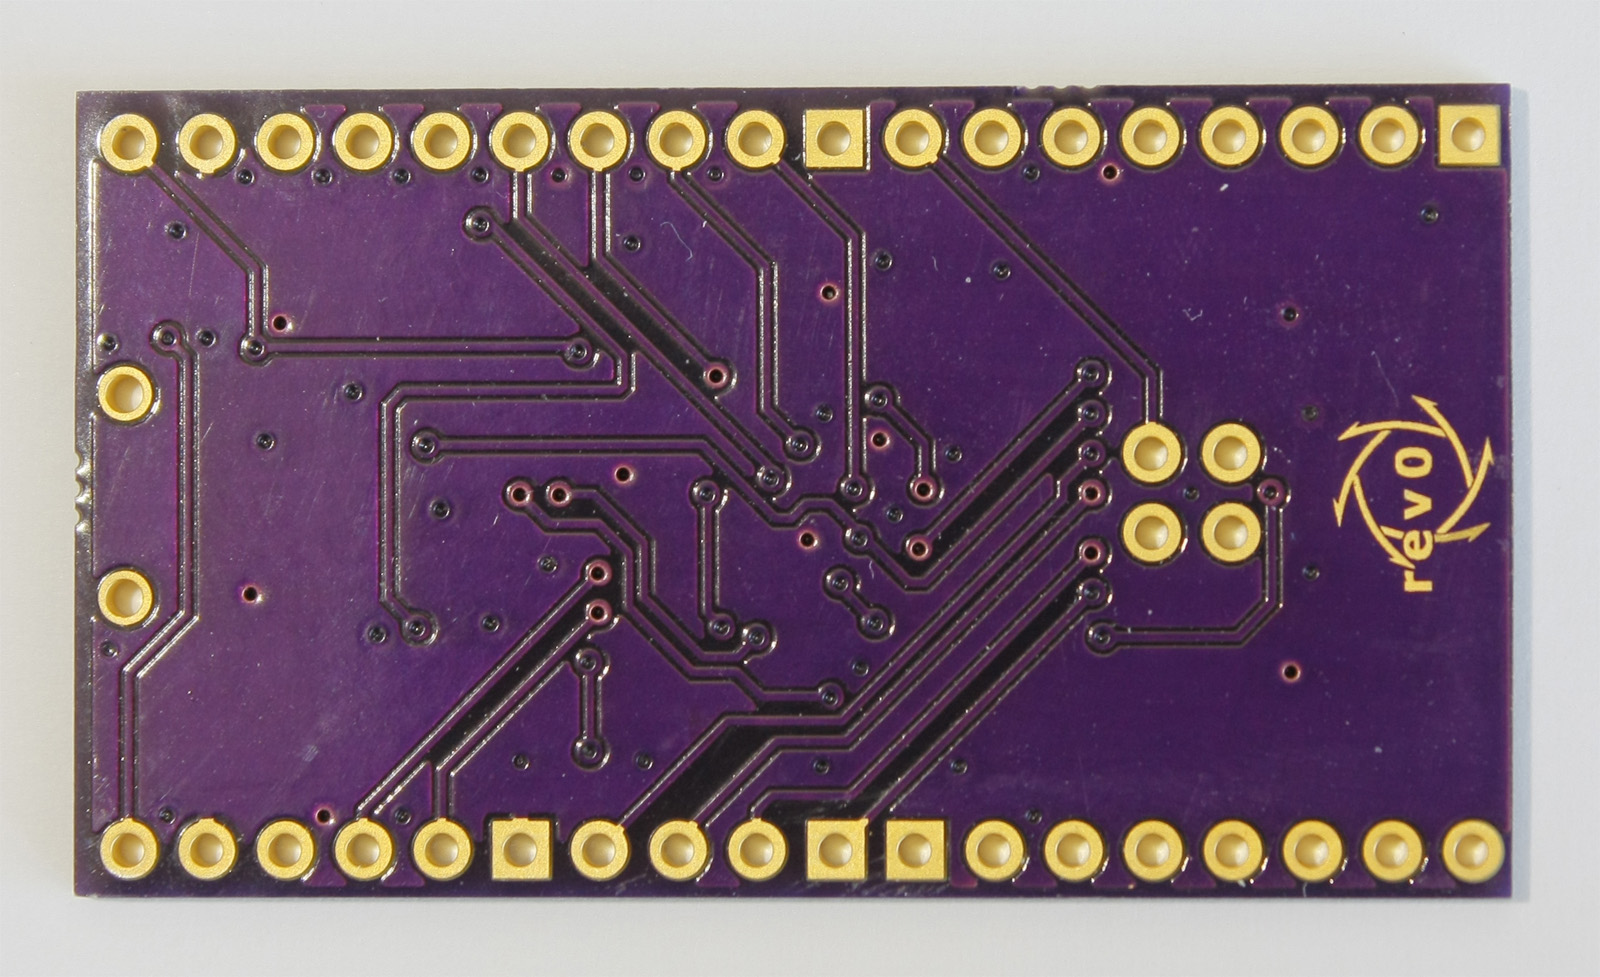 Bottom of unpopulated PCB